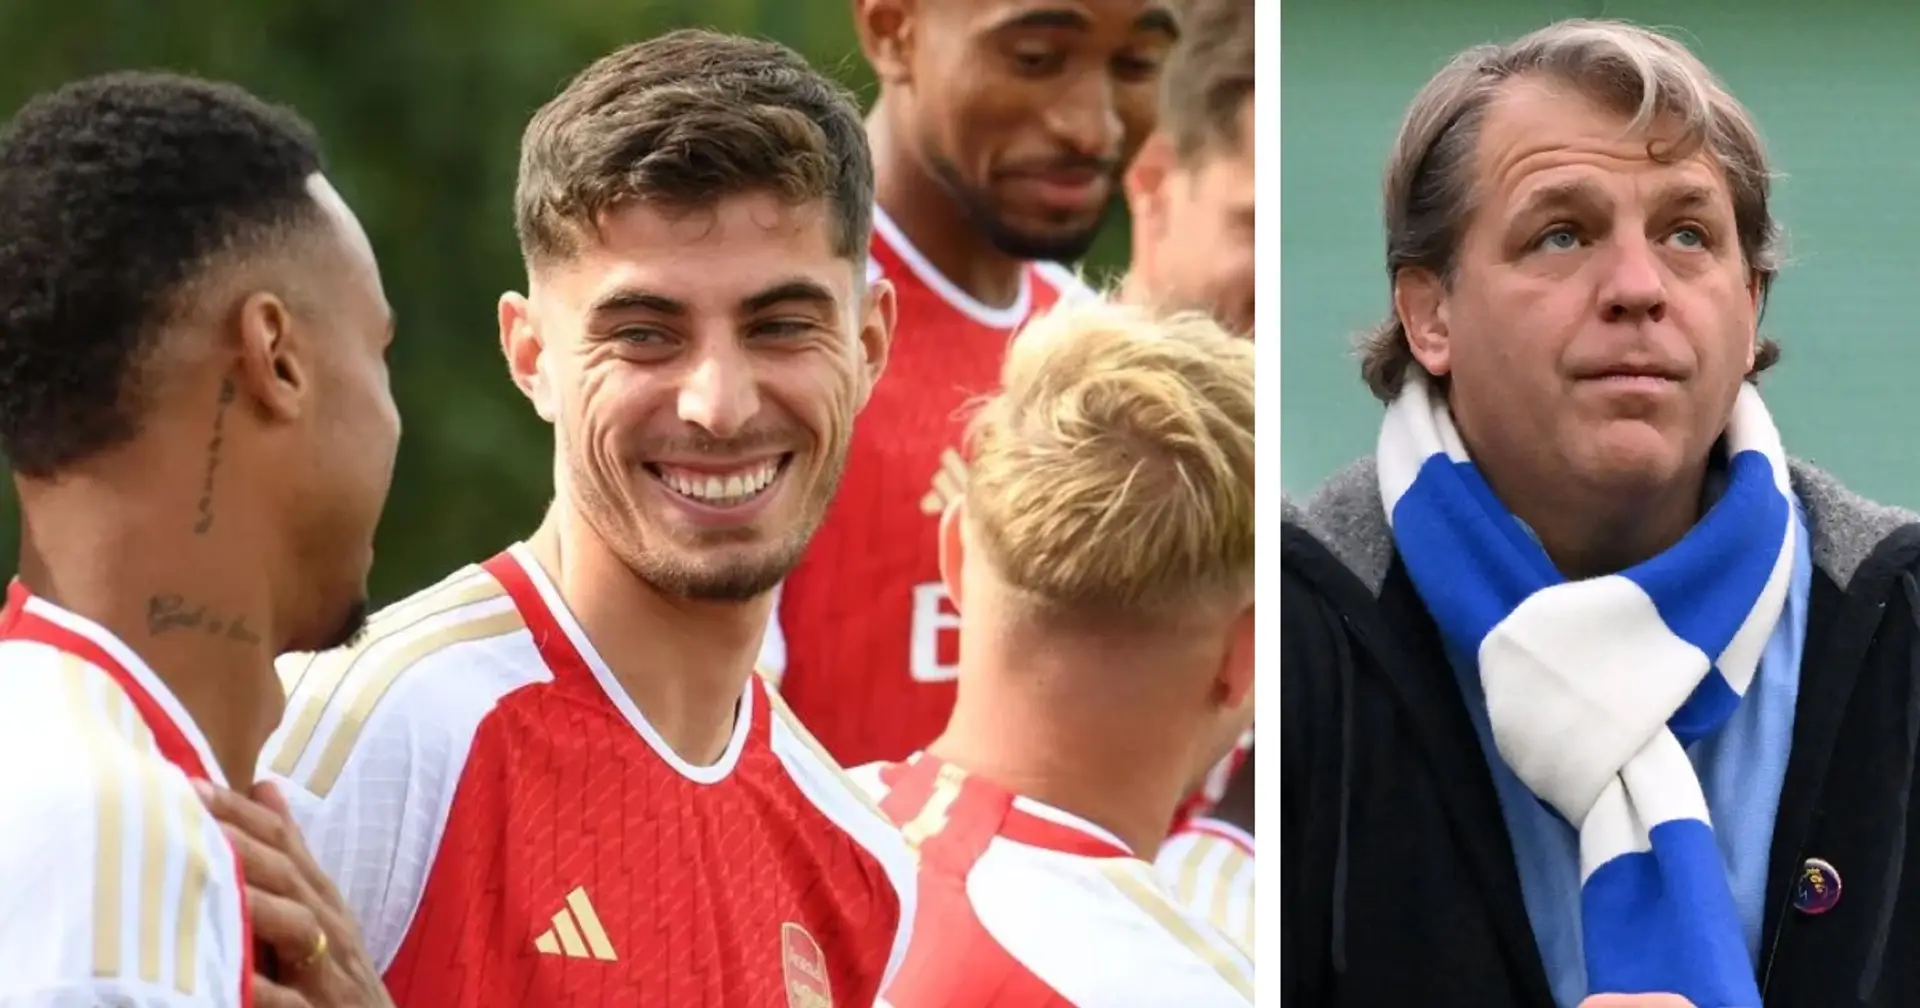 REVEALED: What Kai Havertz has told Arsenal teammates and staff about Chelsea